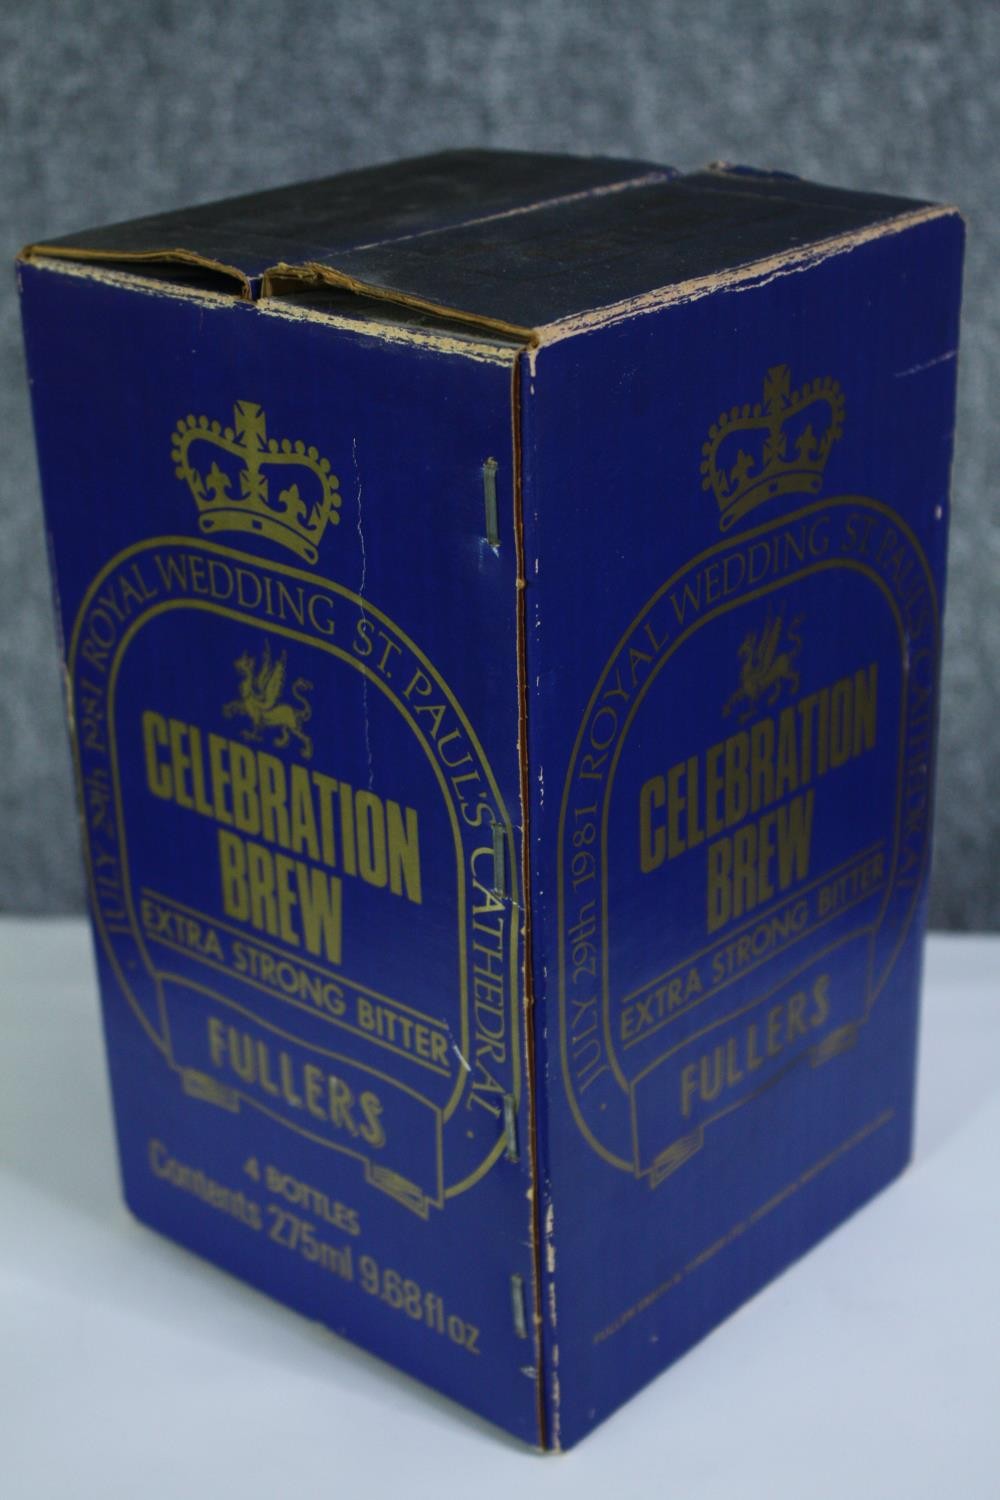 A box of four bottled beers issues by Fullers to celebrate the Royal Wedding of Prince Charles and - Image 2 of 5